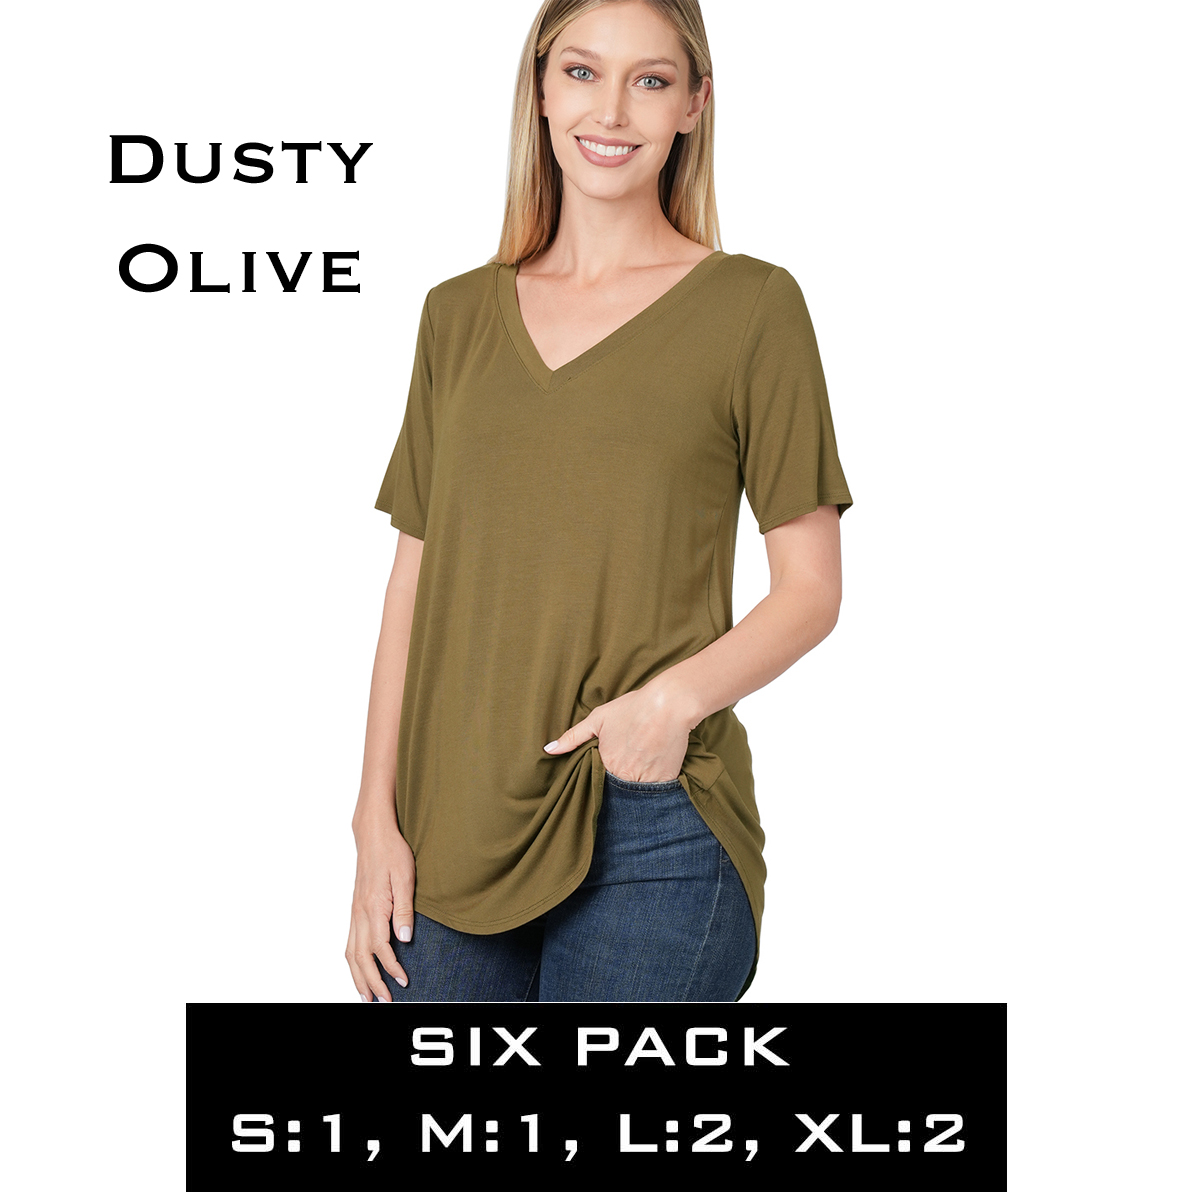 5541 - Dusty Olive - Six Pack